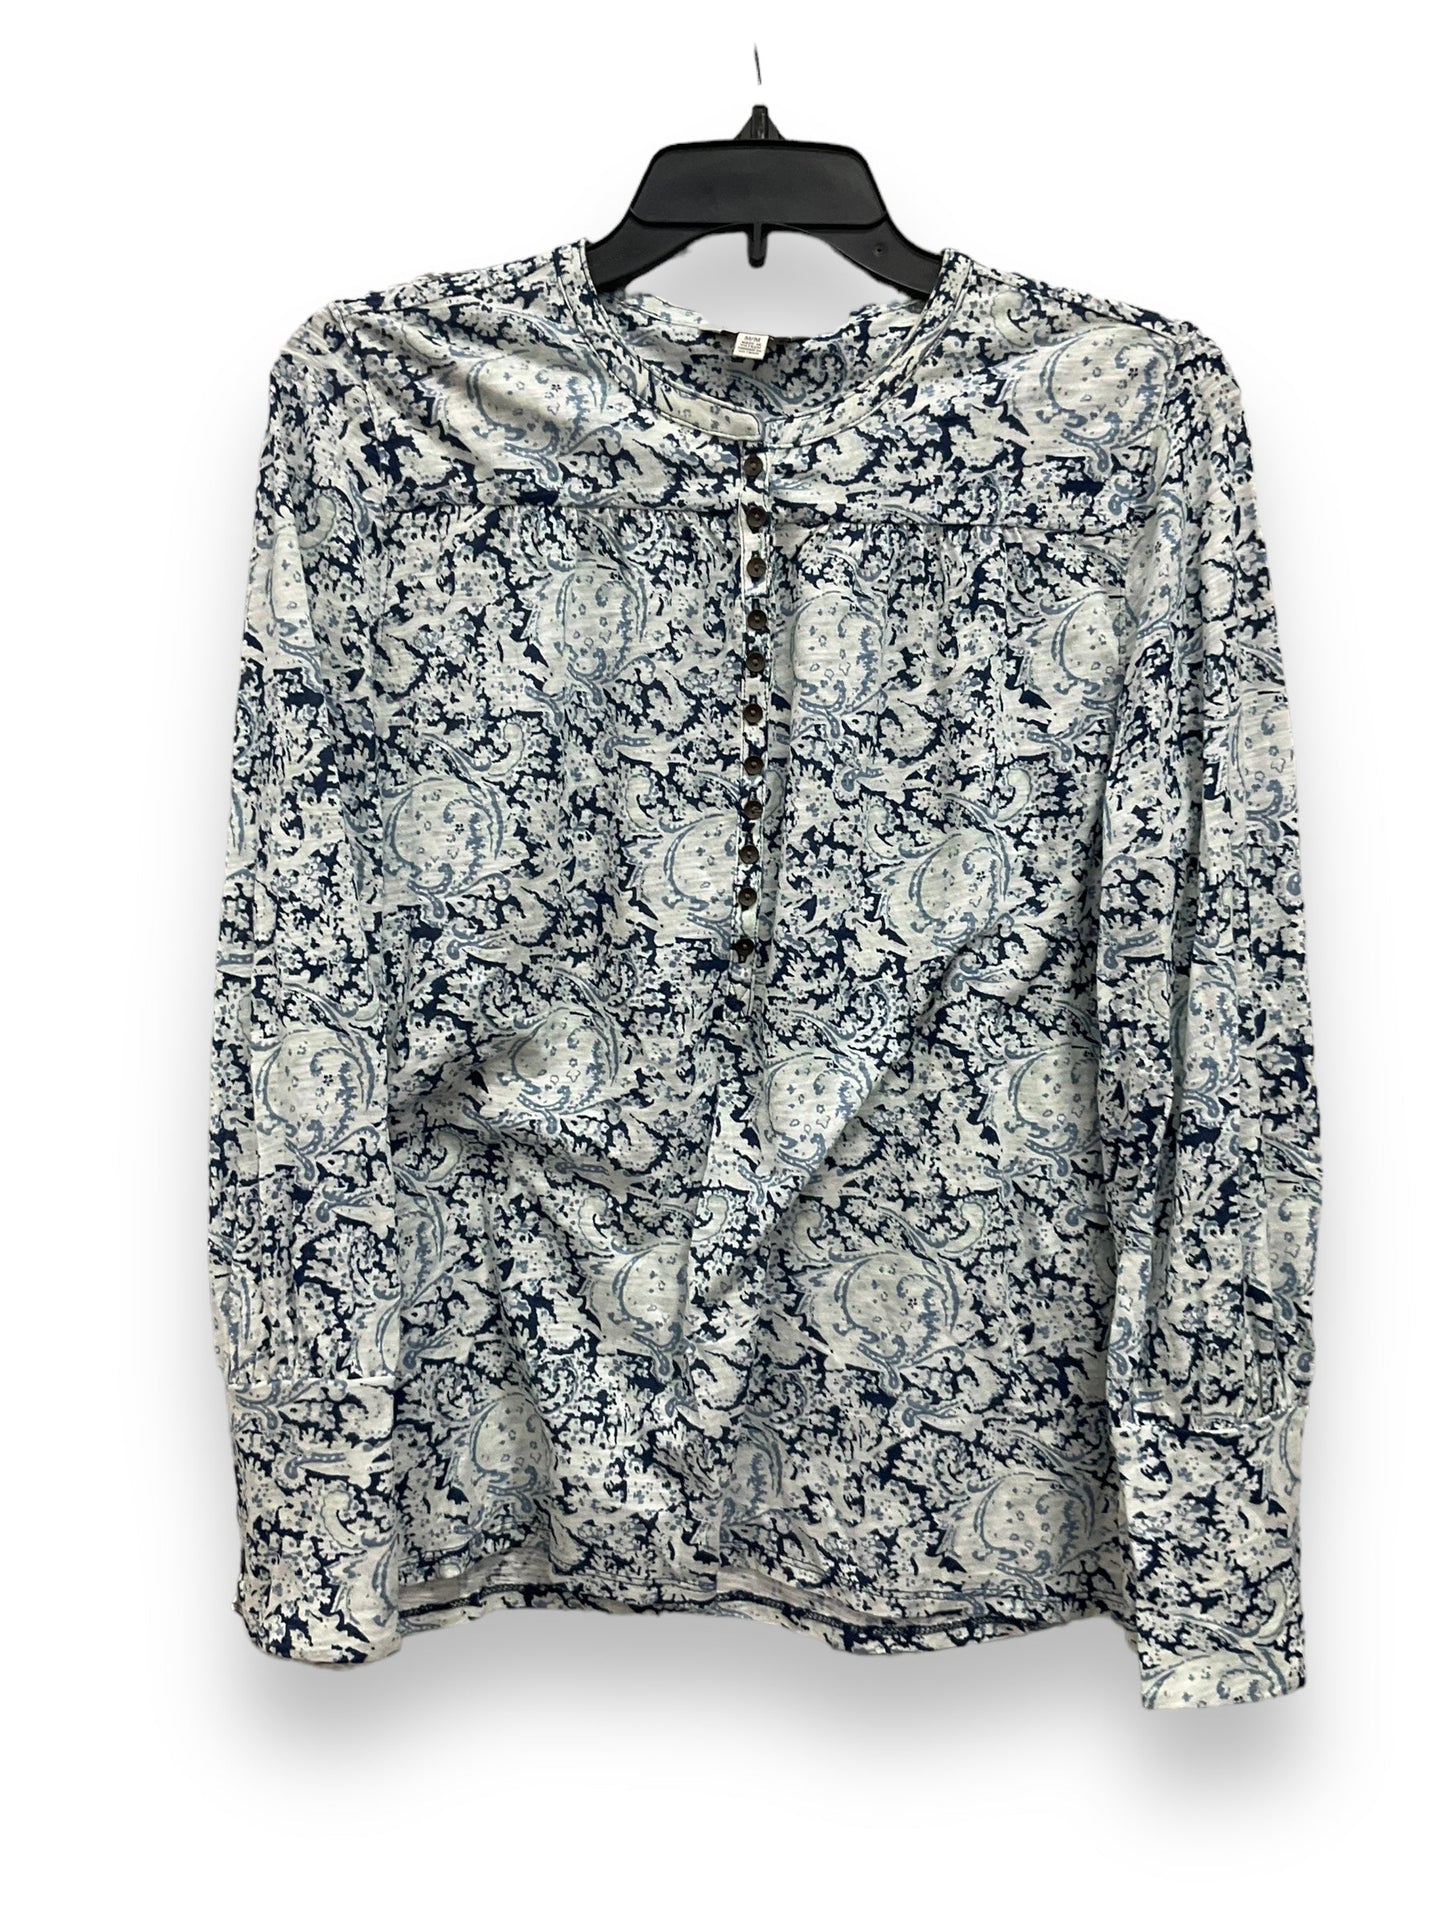 Paisley Print Top Long Sleeve Lucky Brand, Size M